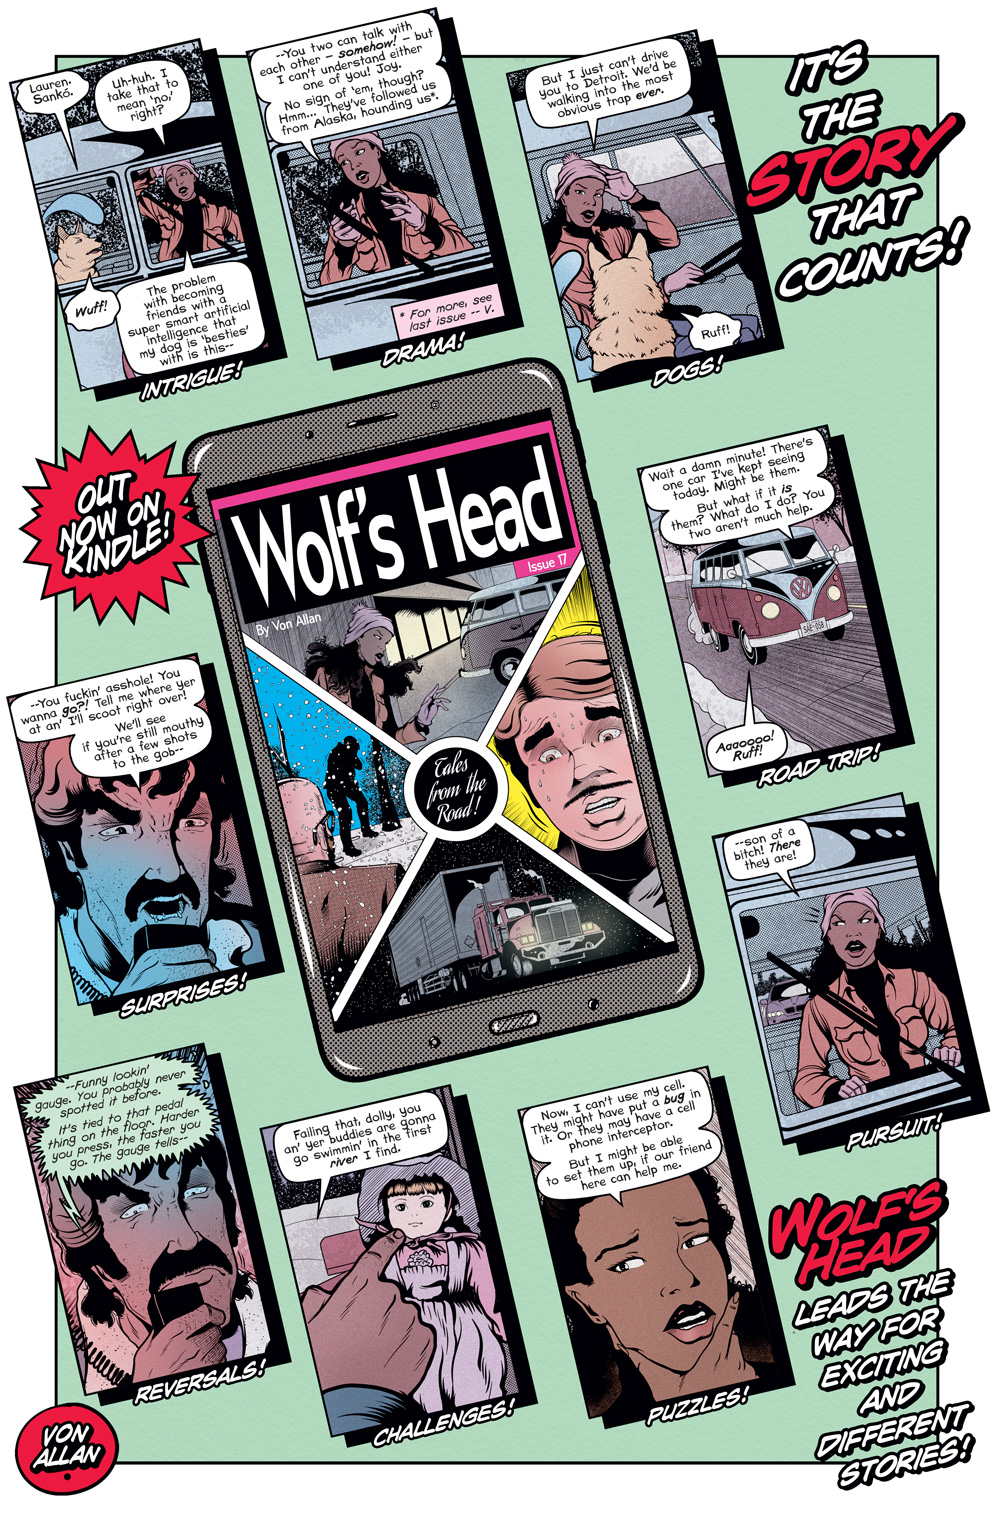 Panel examples from Wolf's Head 17